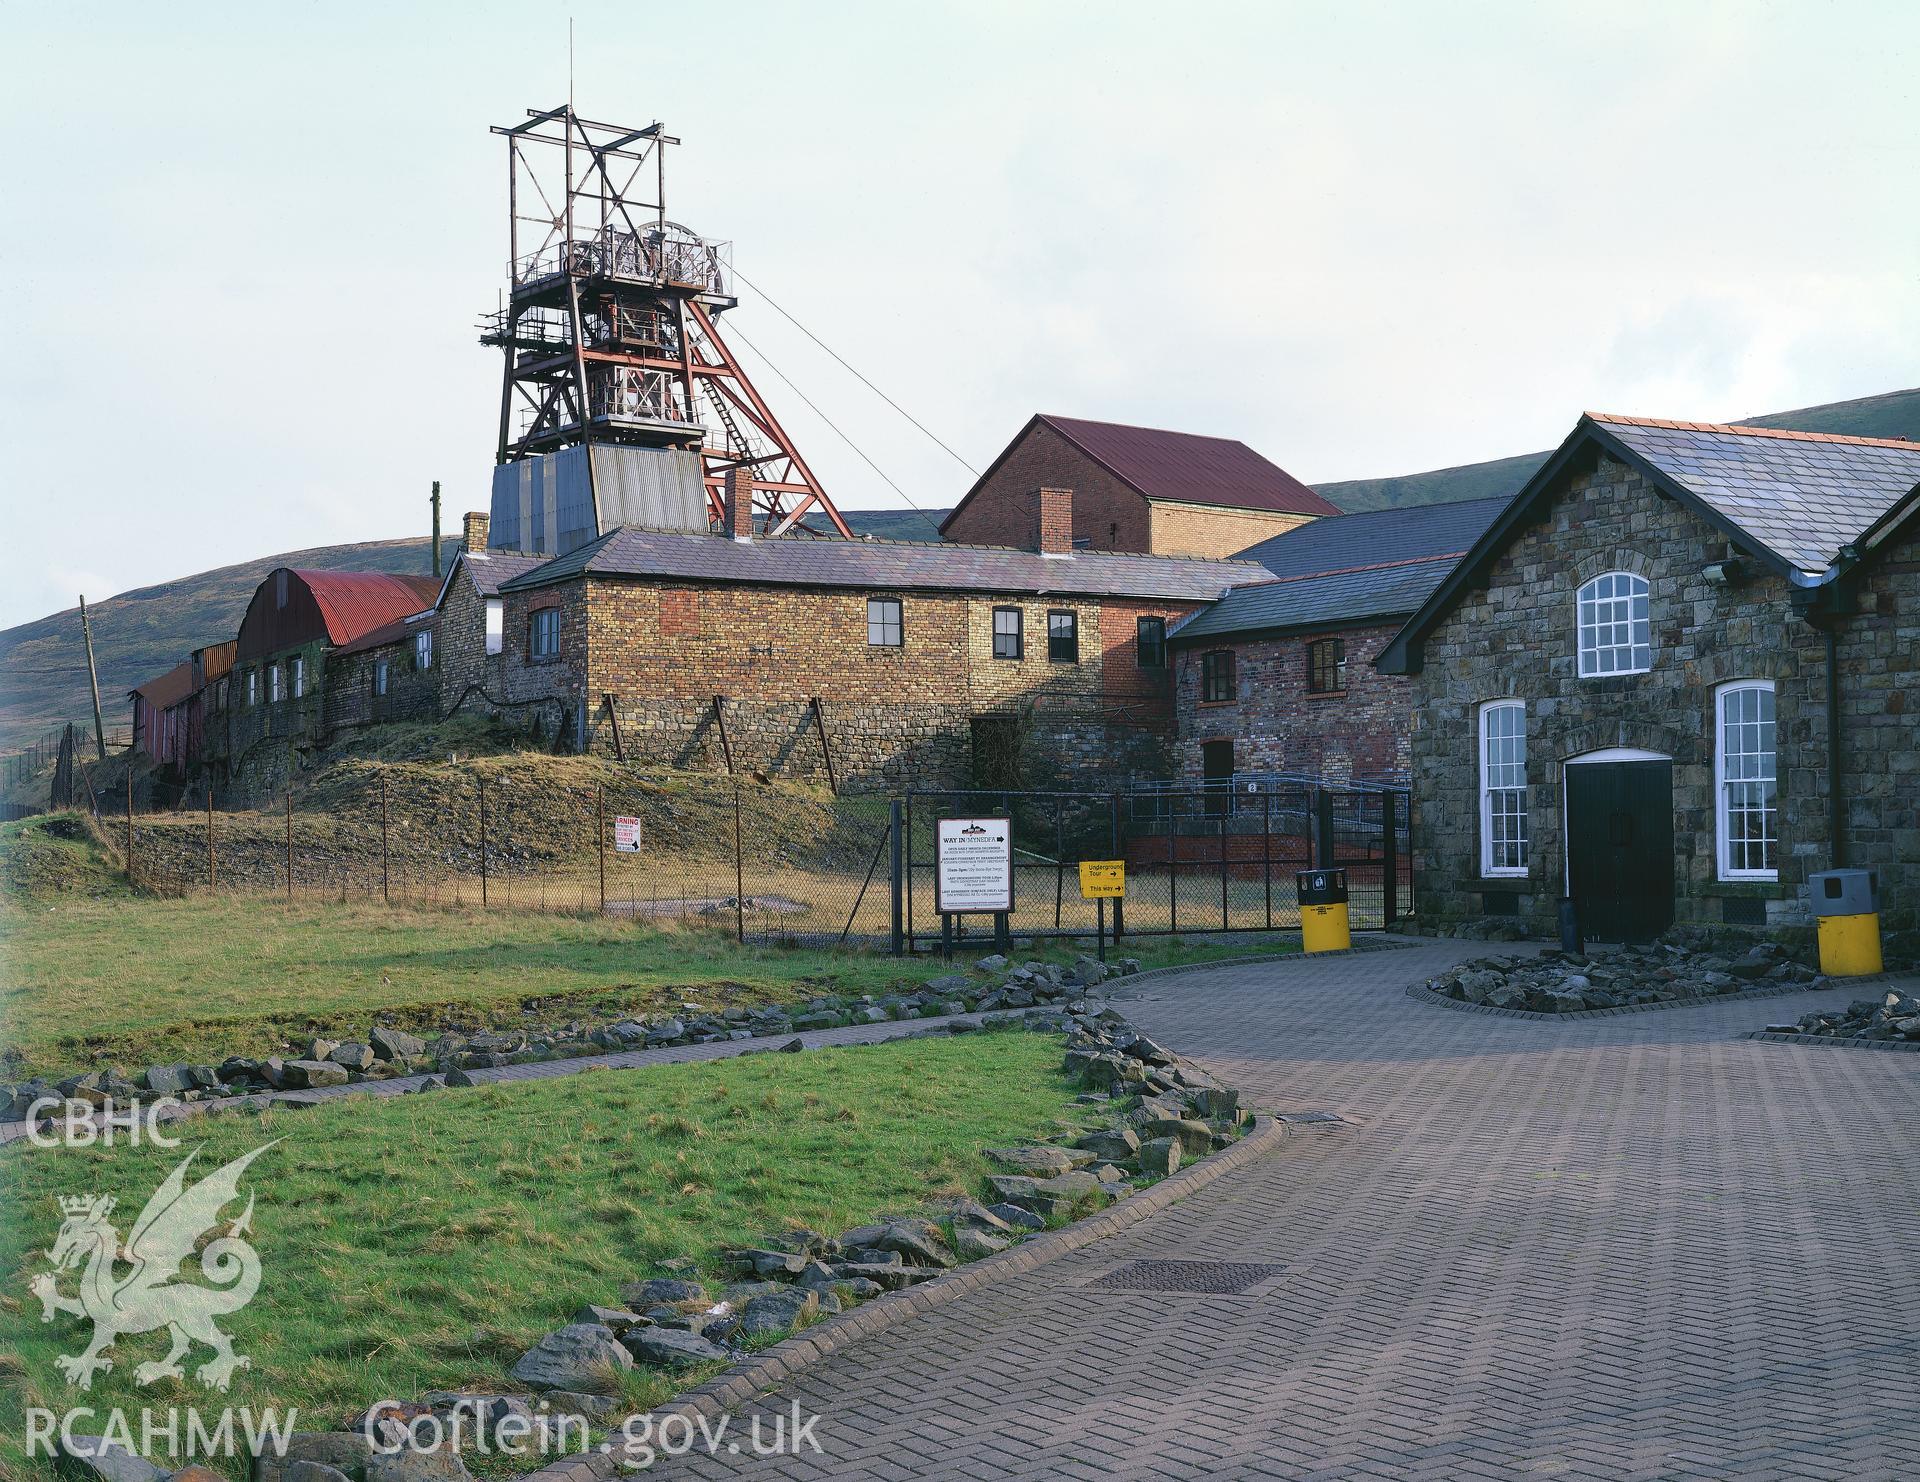 RCAHMW colour transparency showing view of Big Pit.